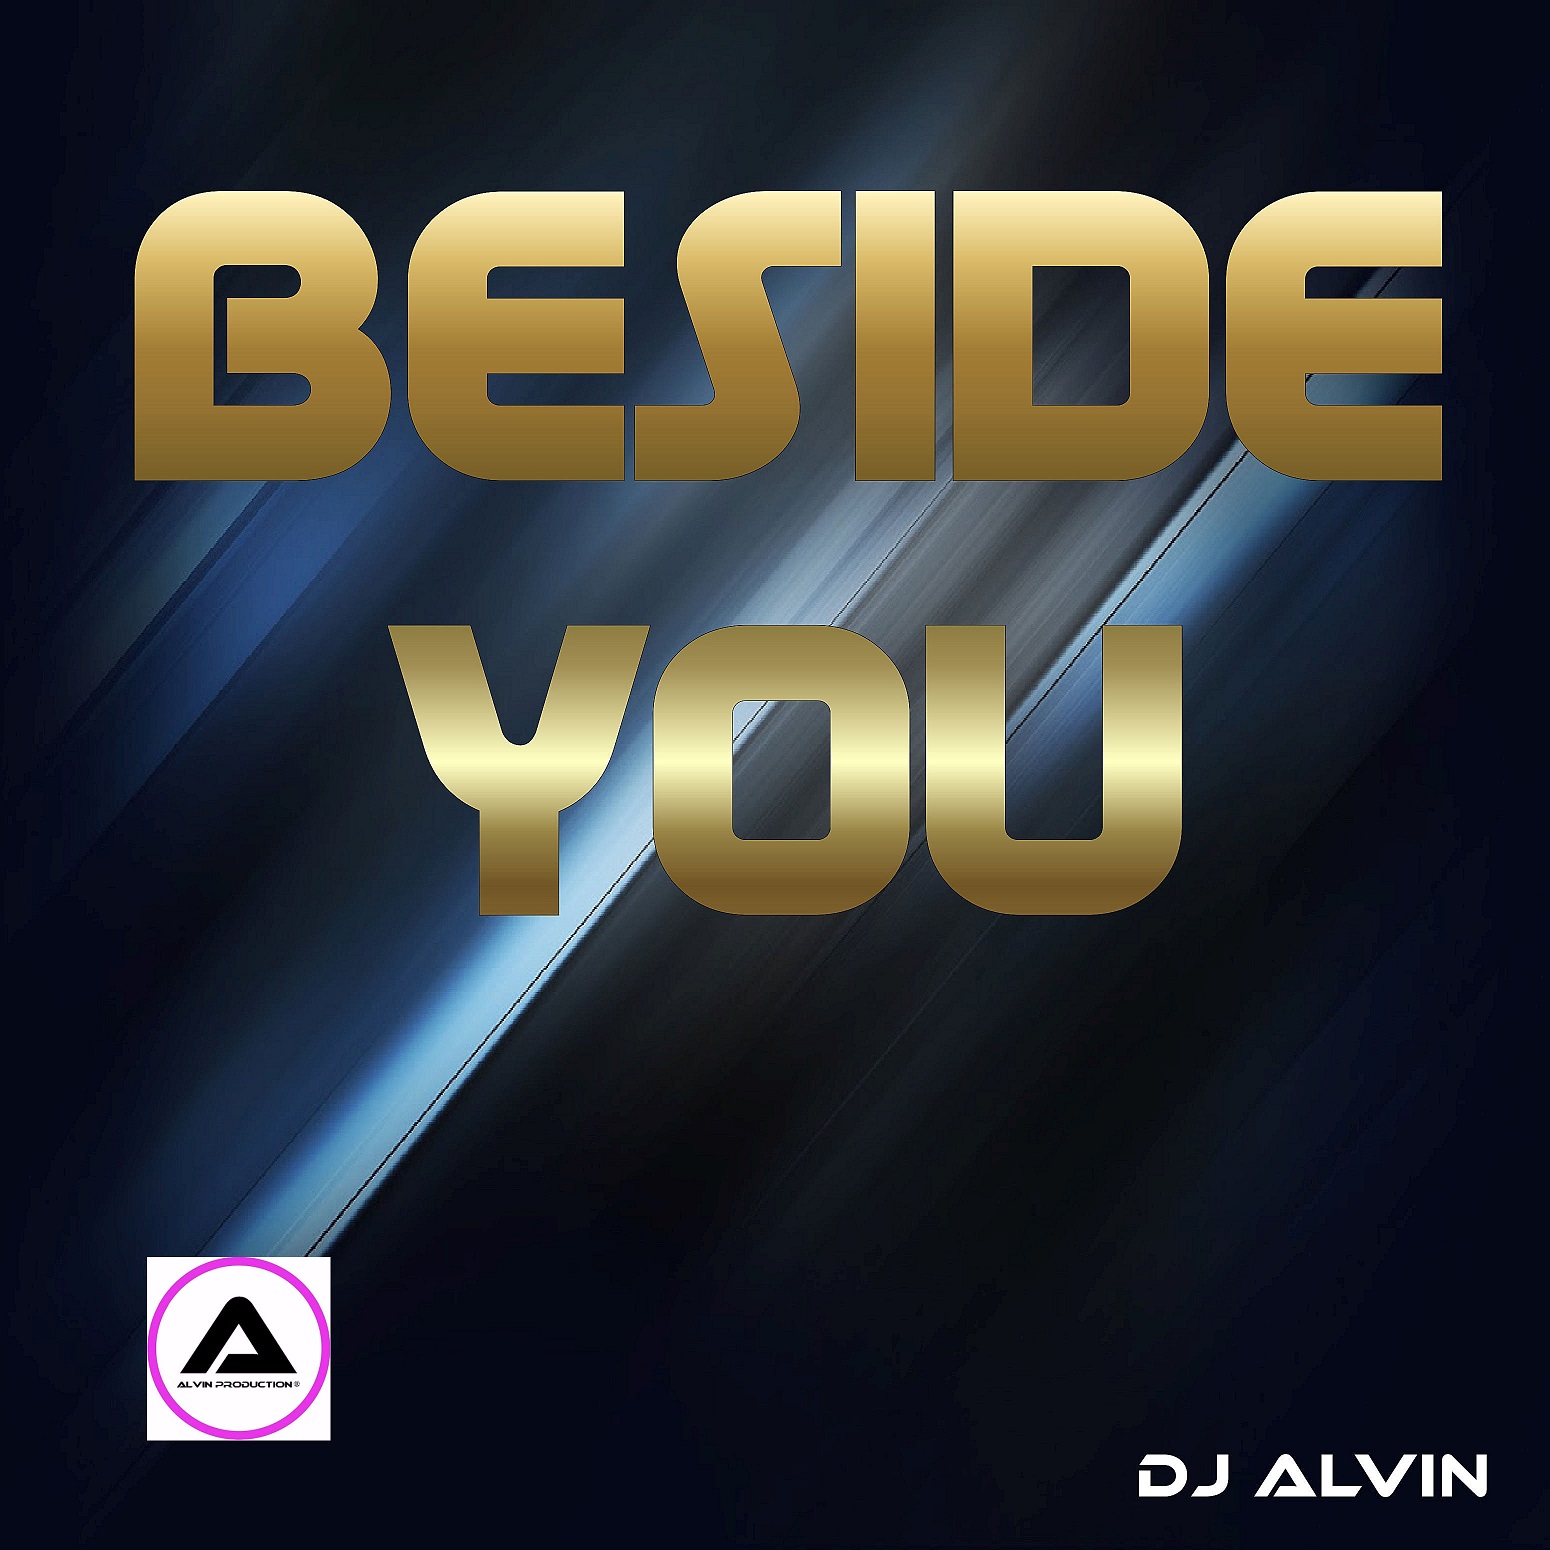  ★ Beside You ★ 